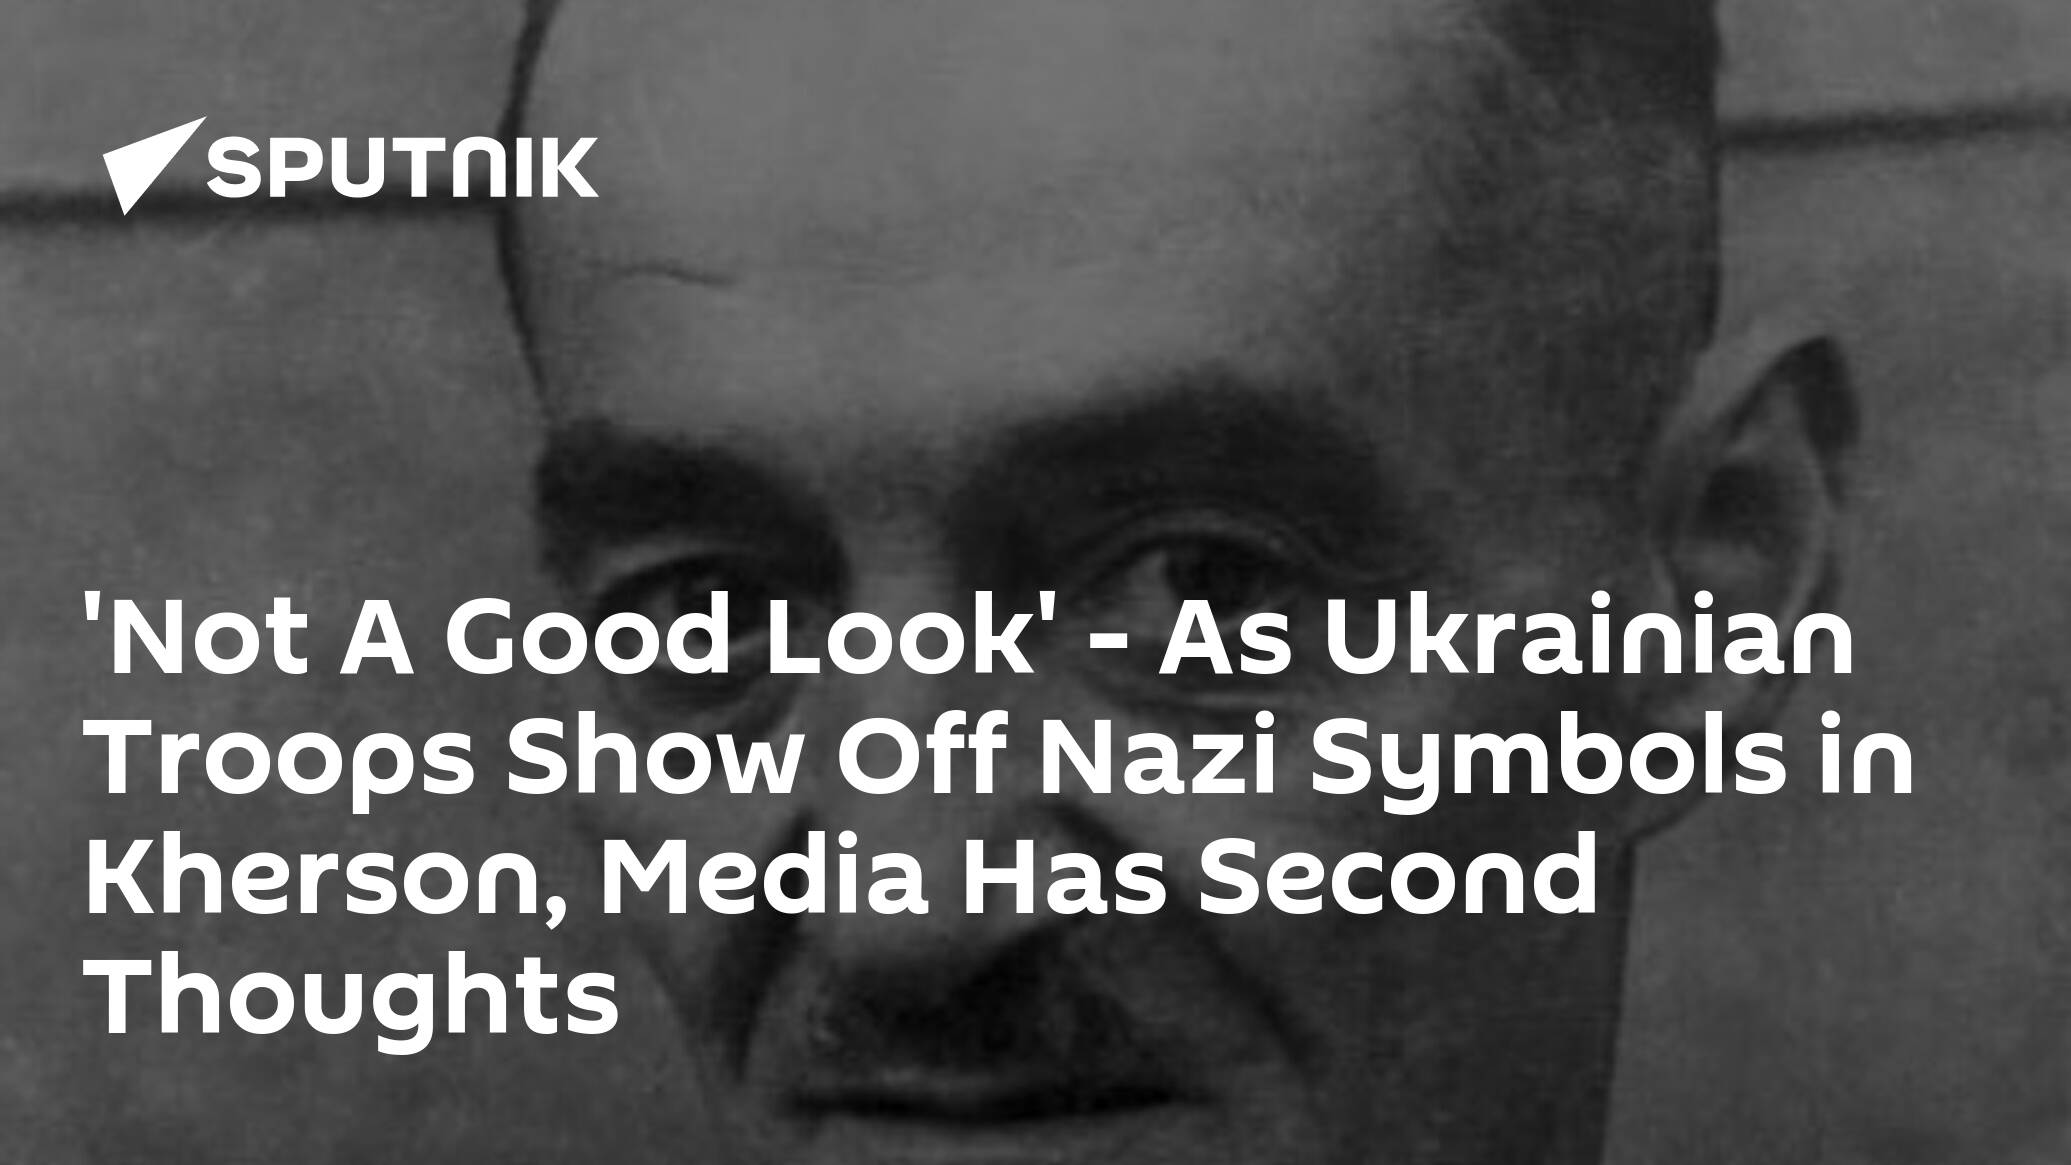 'Not A Good Look' - As Ukrainian Troops Show Off Nazi Symbols in Kherson, Media Has Second Thoughts